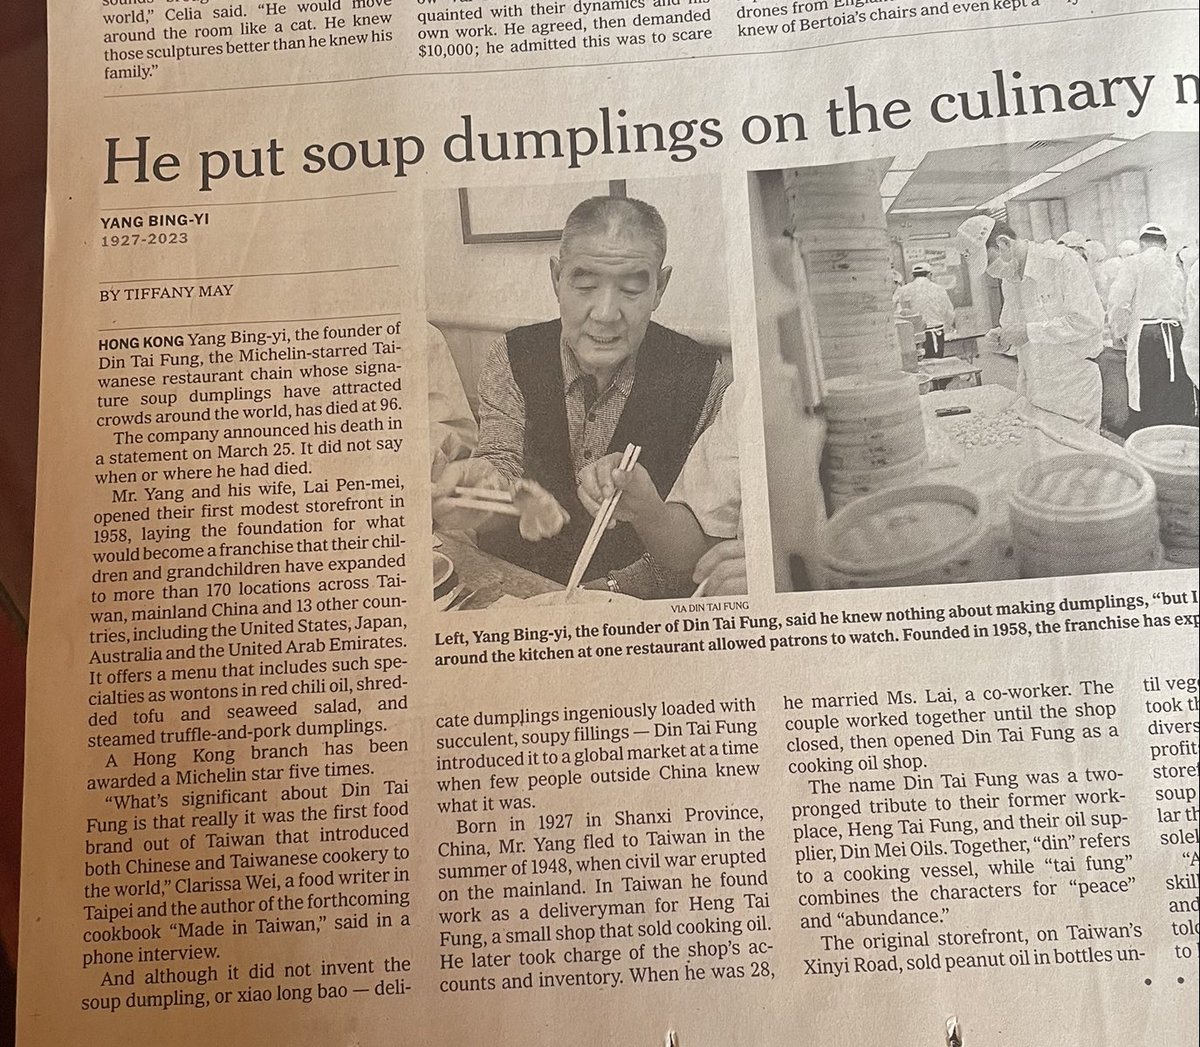 The founder of #DinTaiFung Yan  Bing-yi has died. A remarkable business across the world in 170different locations. It is exceptionally well drilled operation and a social note should be made if their #vegetables. #KenHom “It’s consistently good” and it is